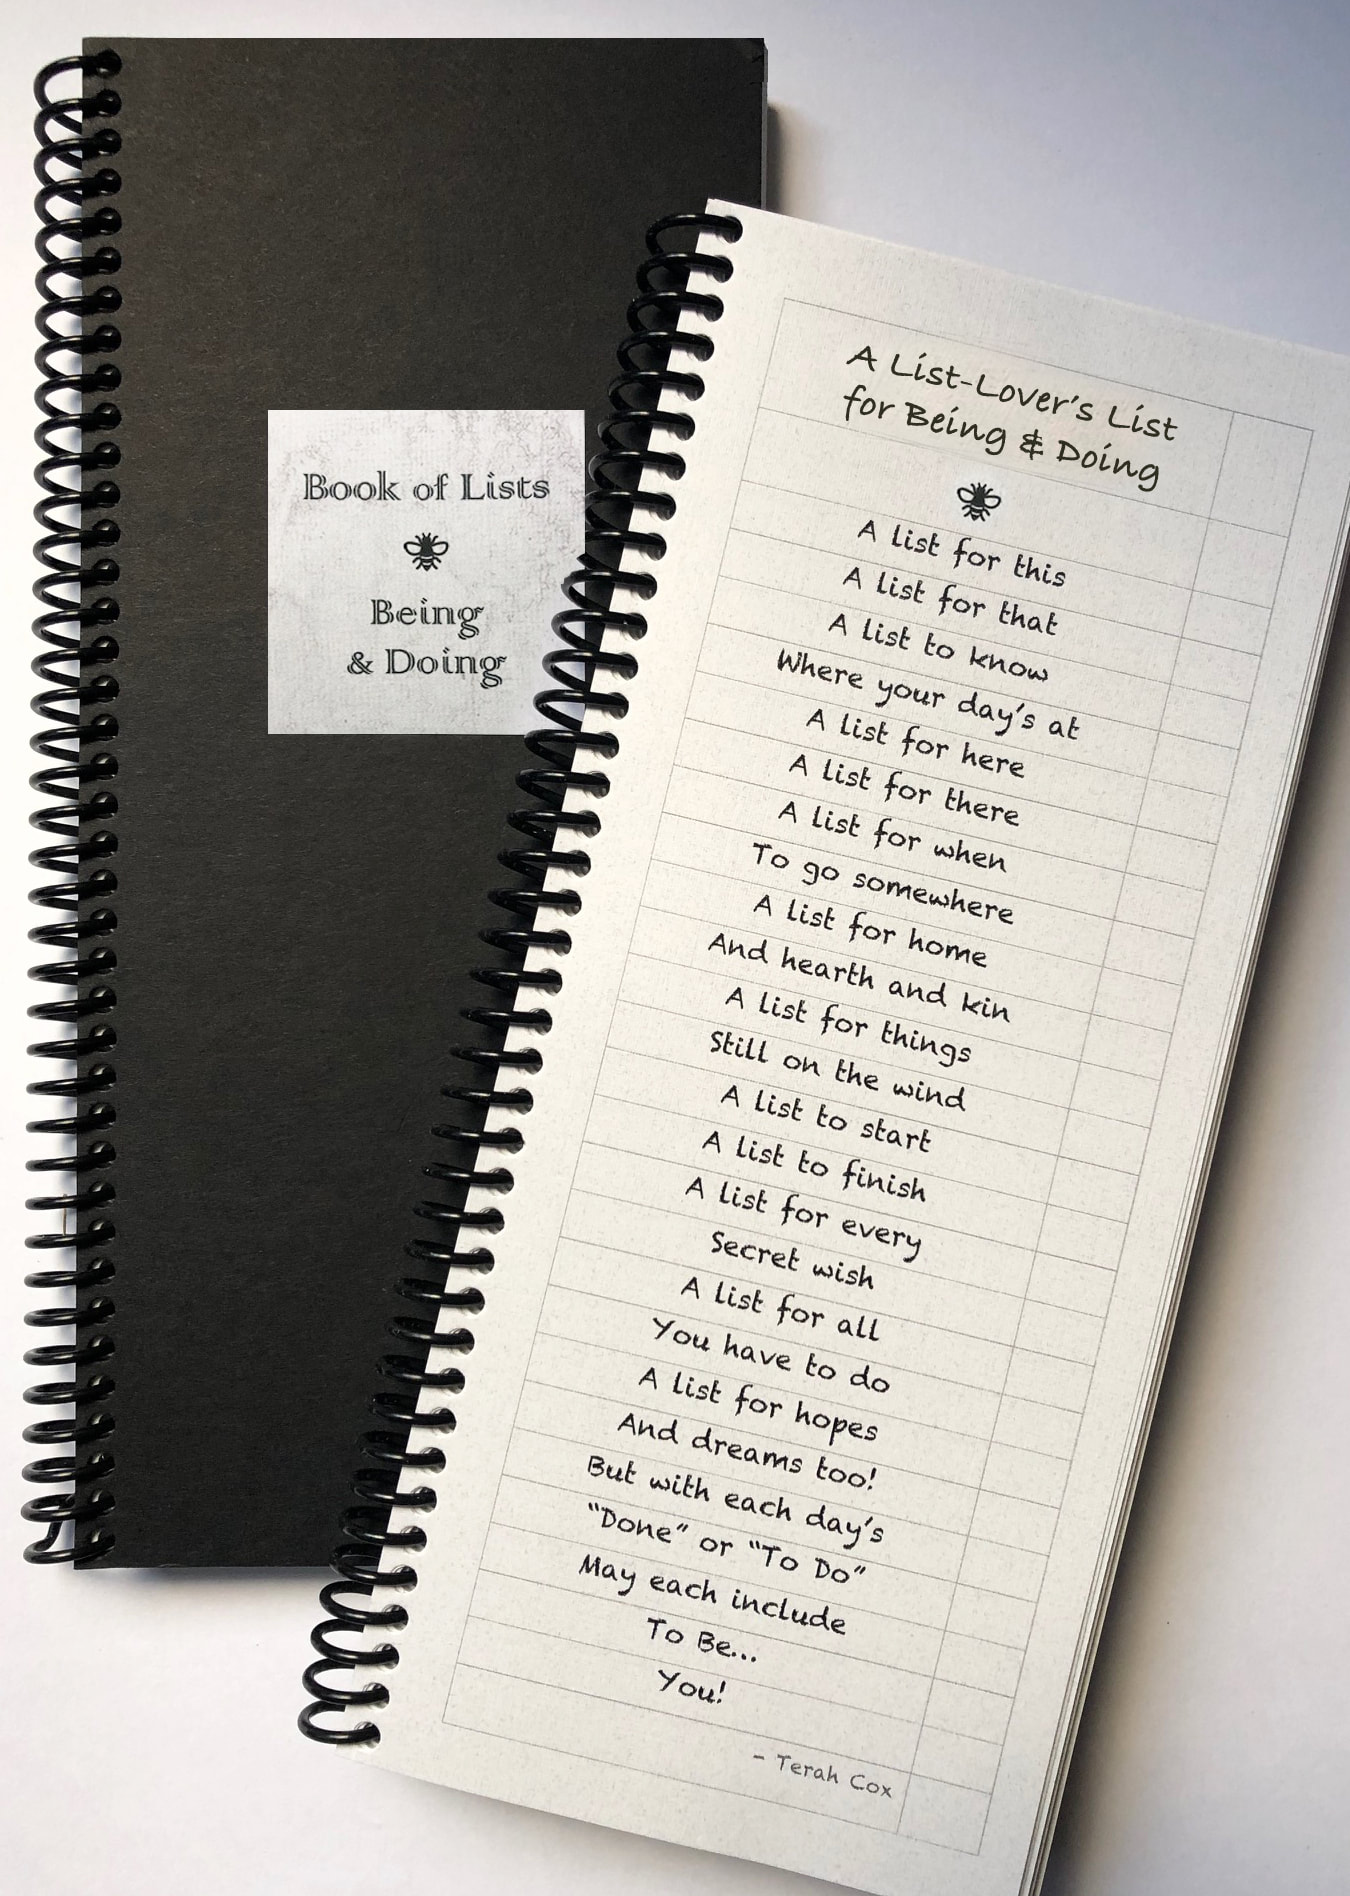 BOOK OF LISTS for BEING & DOING by Terah Cox